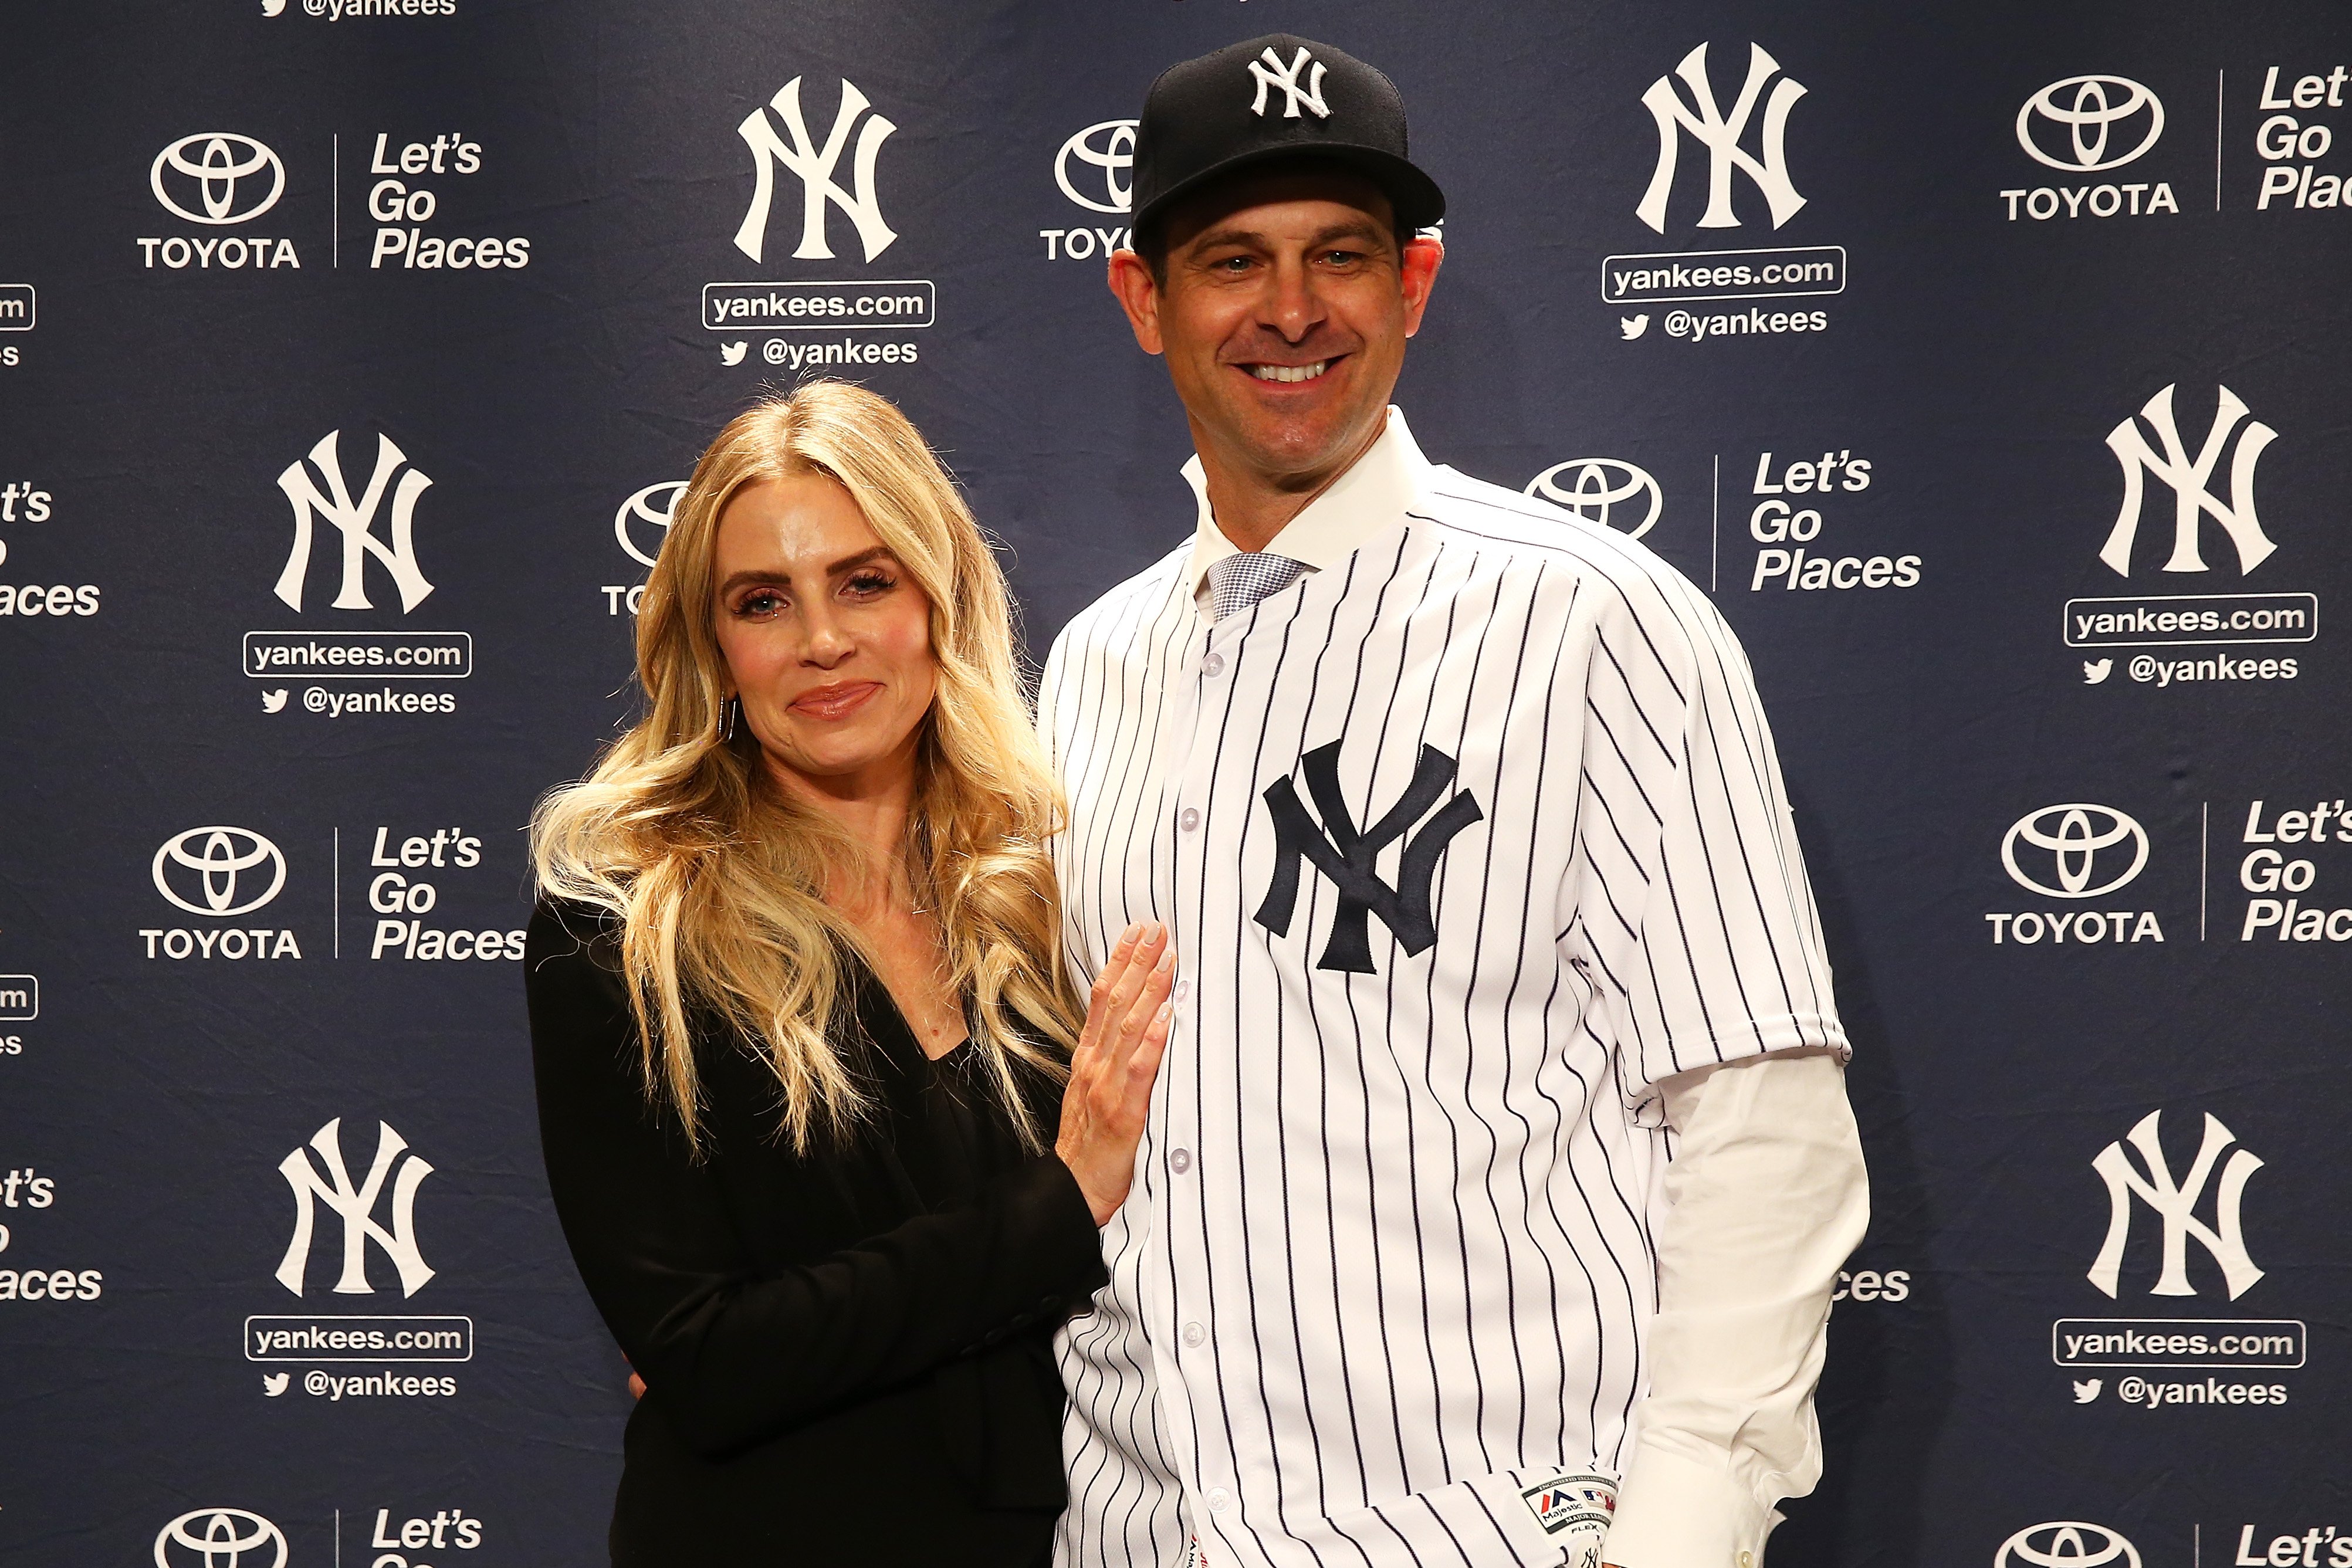  Aaron Boone with his wife Laura Cover after being introduced as manager of the New York Yankeesin 2017, in New York City. | Source: Getty Images